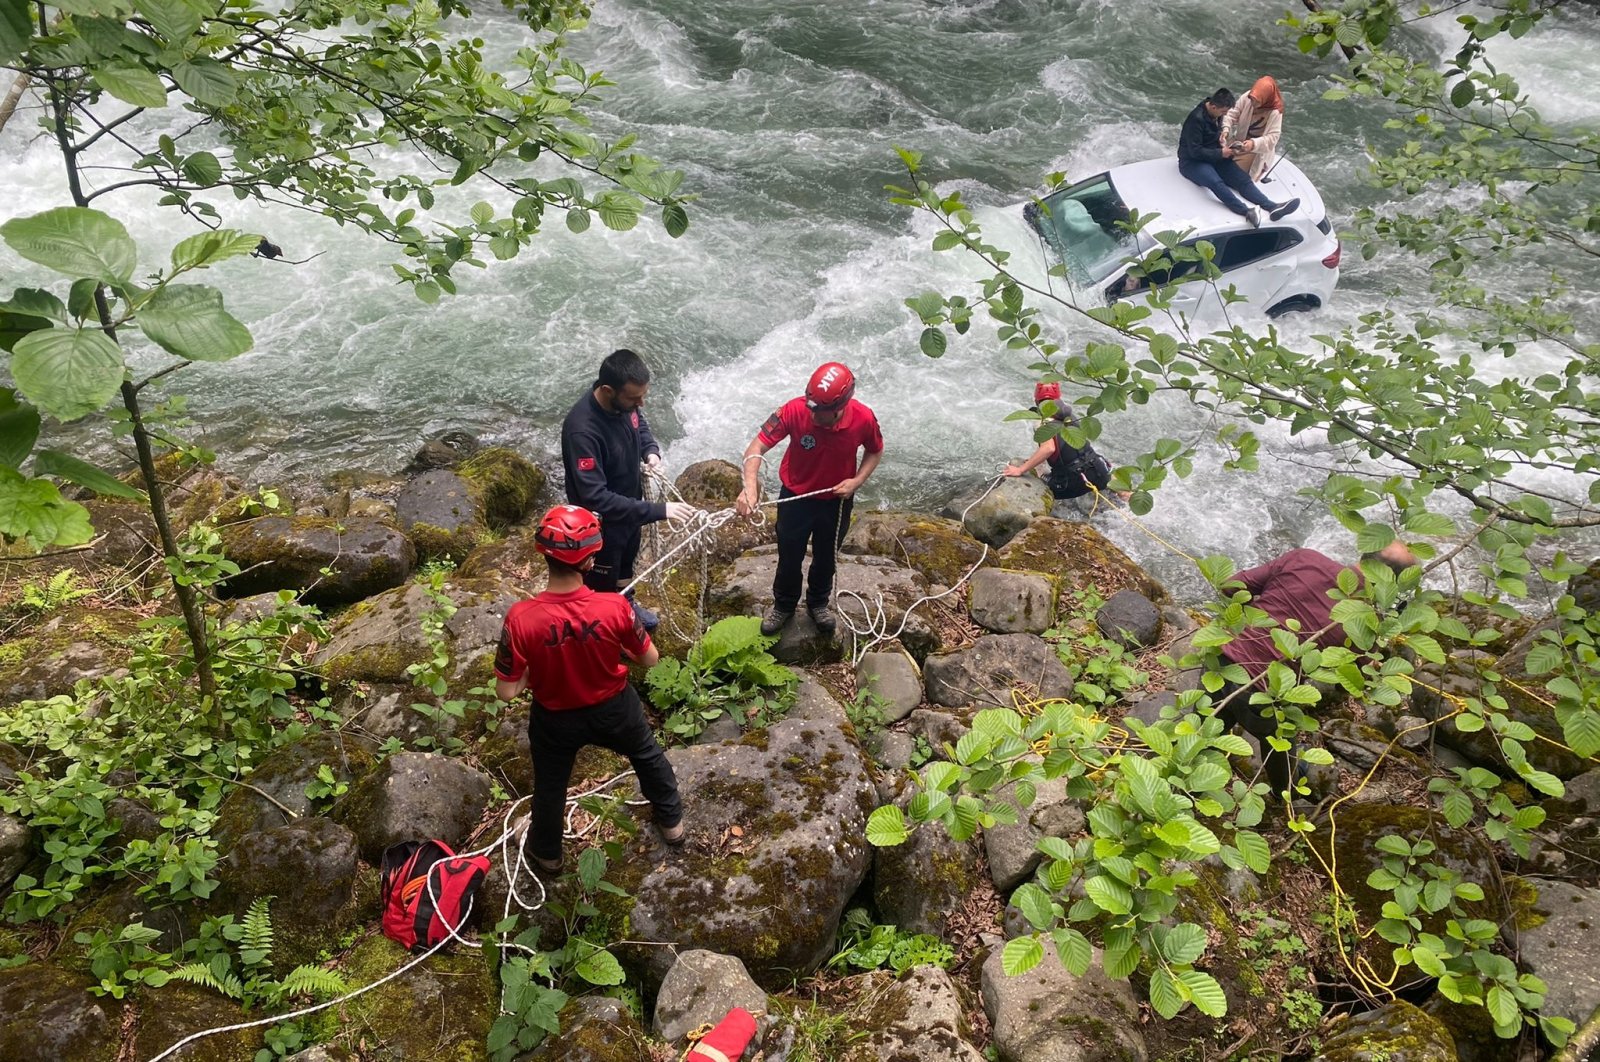 Rescue teams pass a rope to a couple stranded in a rushing river, in Rize, northern Turkey, May 25, 2022. (DHA PHOTO)